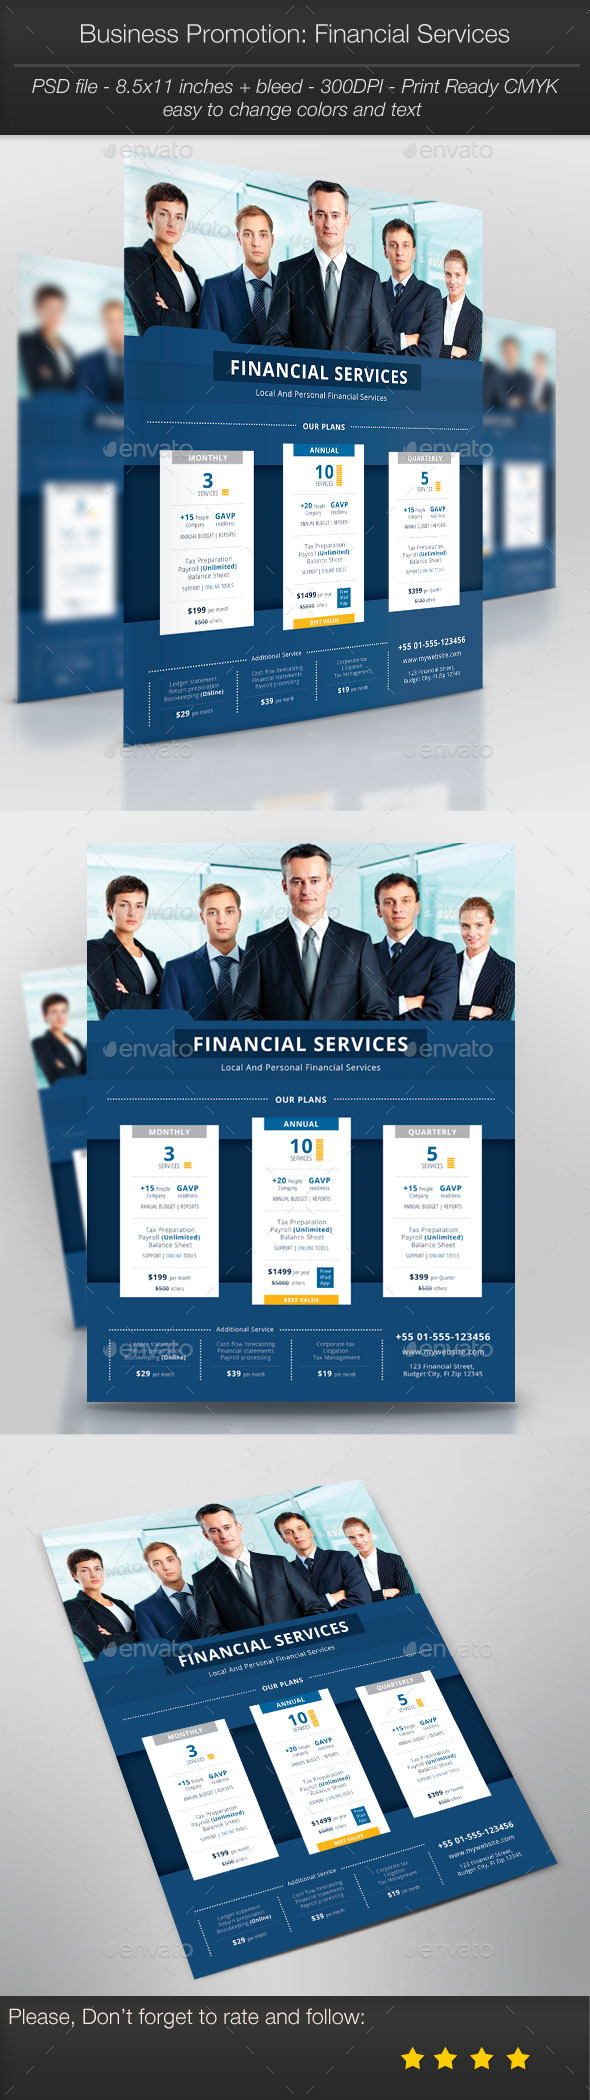 Business Promotion: Financial Services